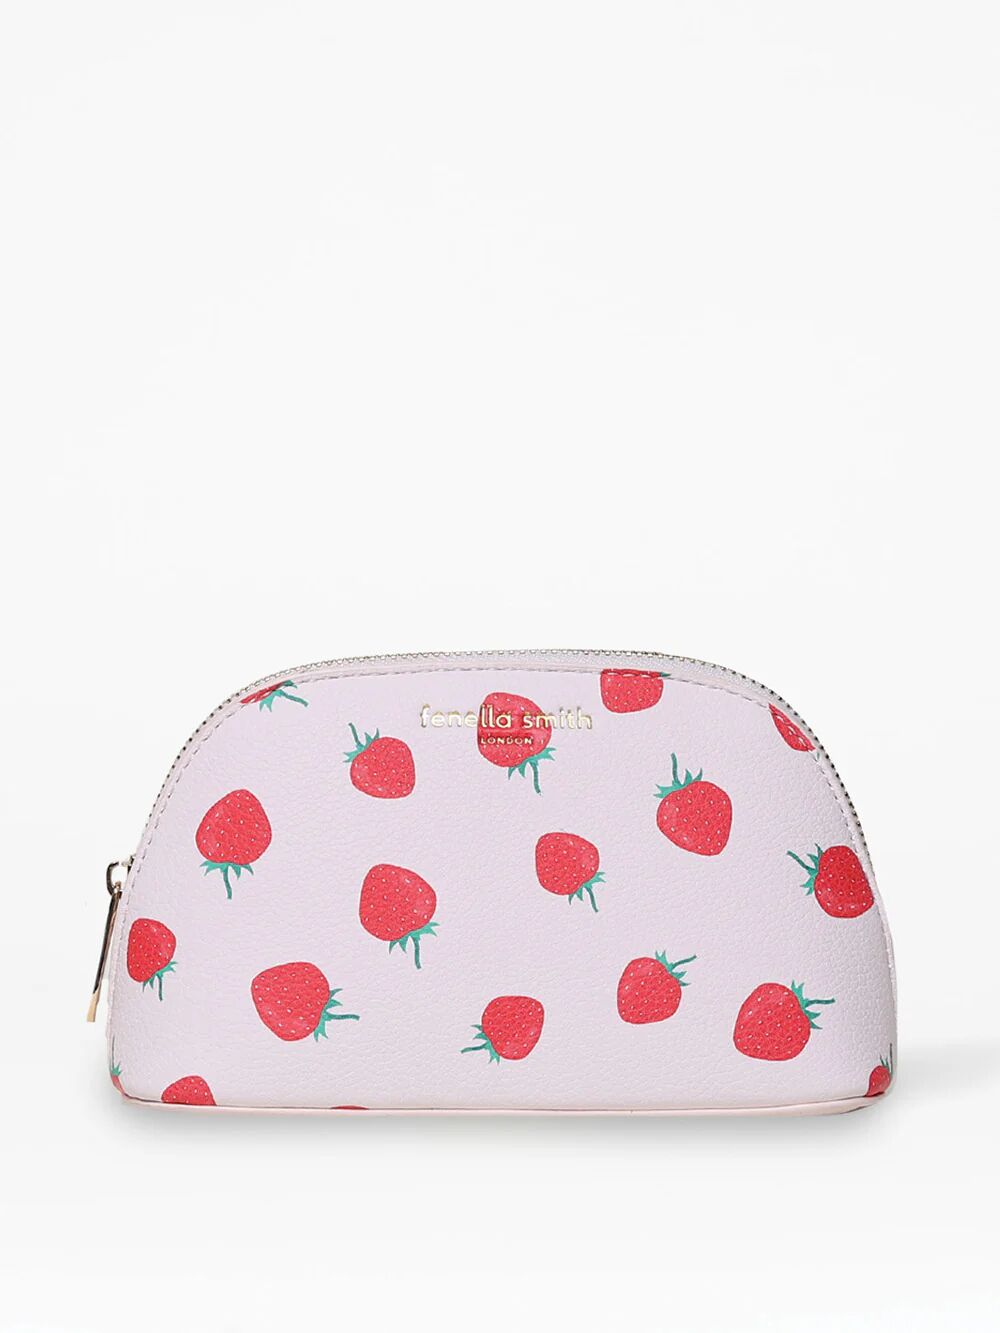 Fenella Smith Recycled Strawberry Oyster Cosmetic Case Unisex